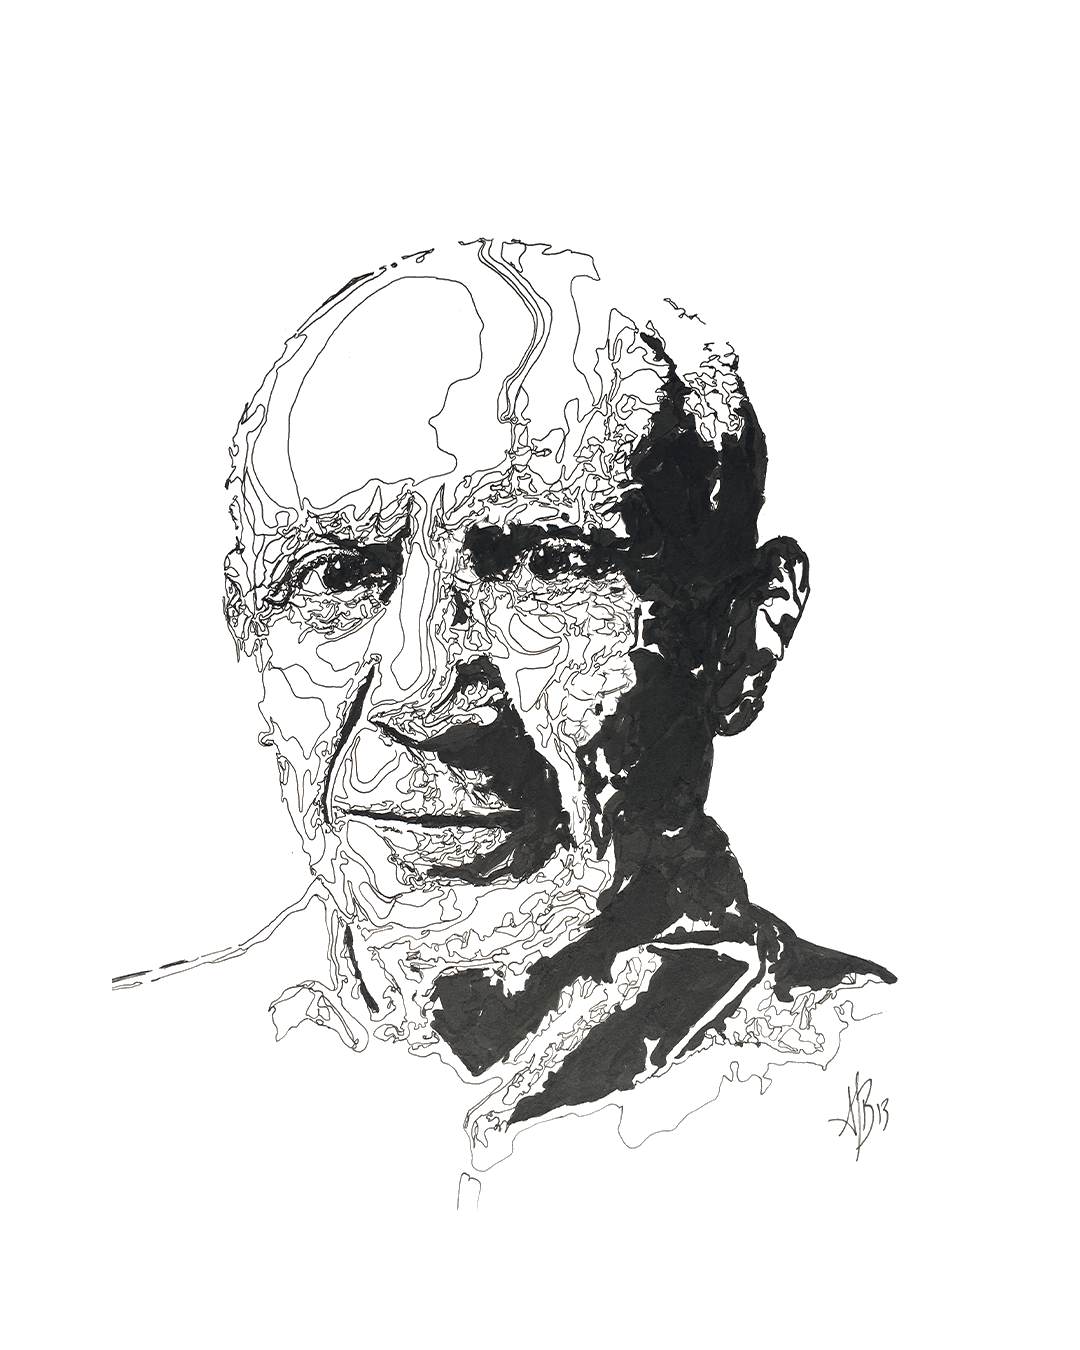 pen and ink line drawing of Pablo picasso